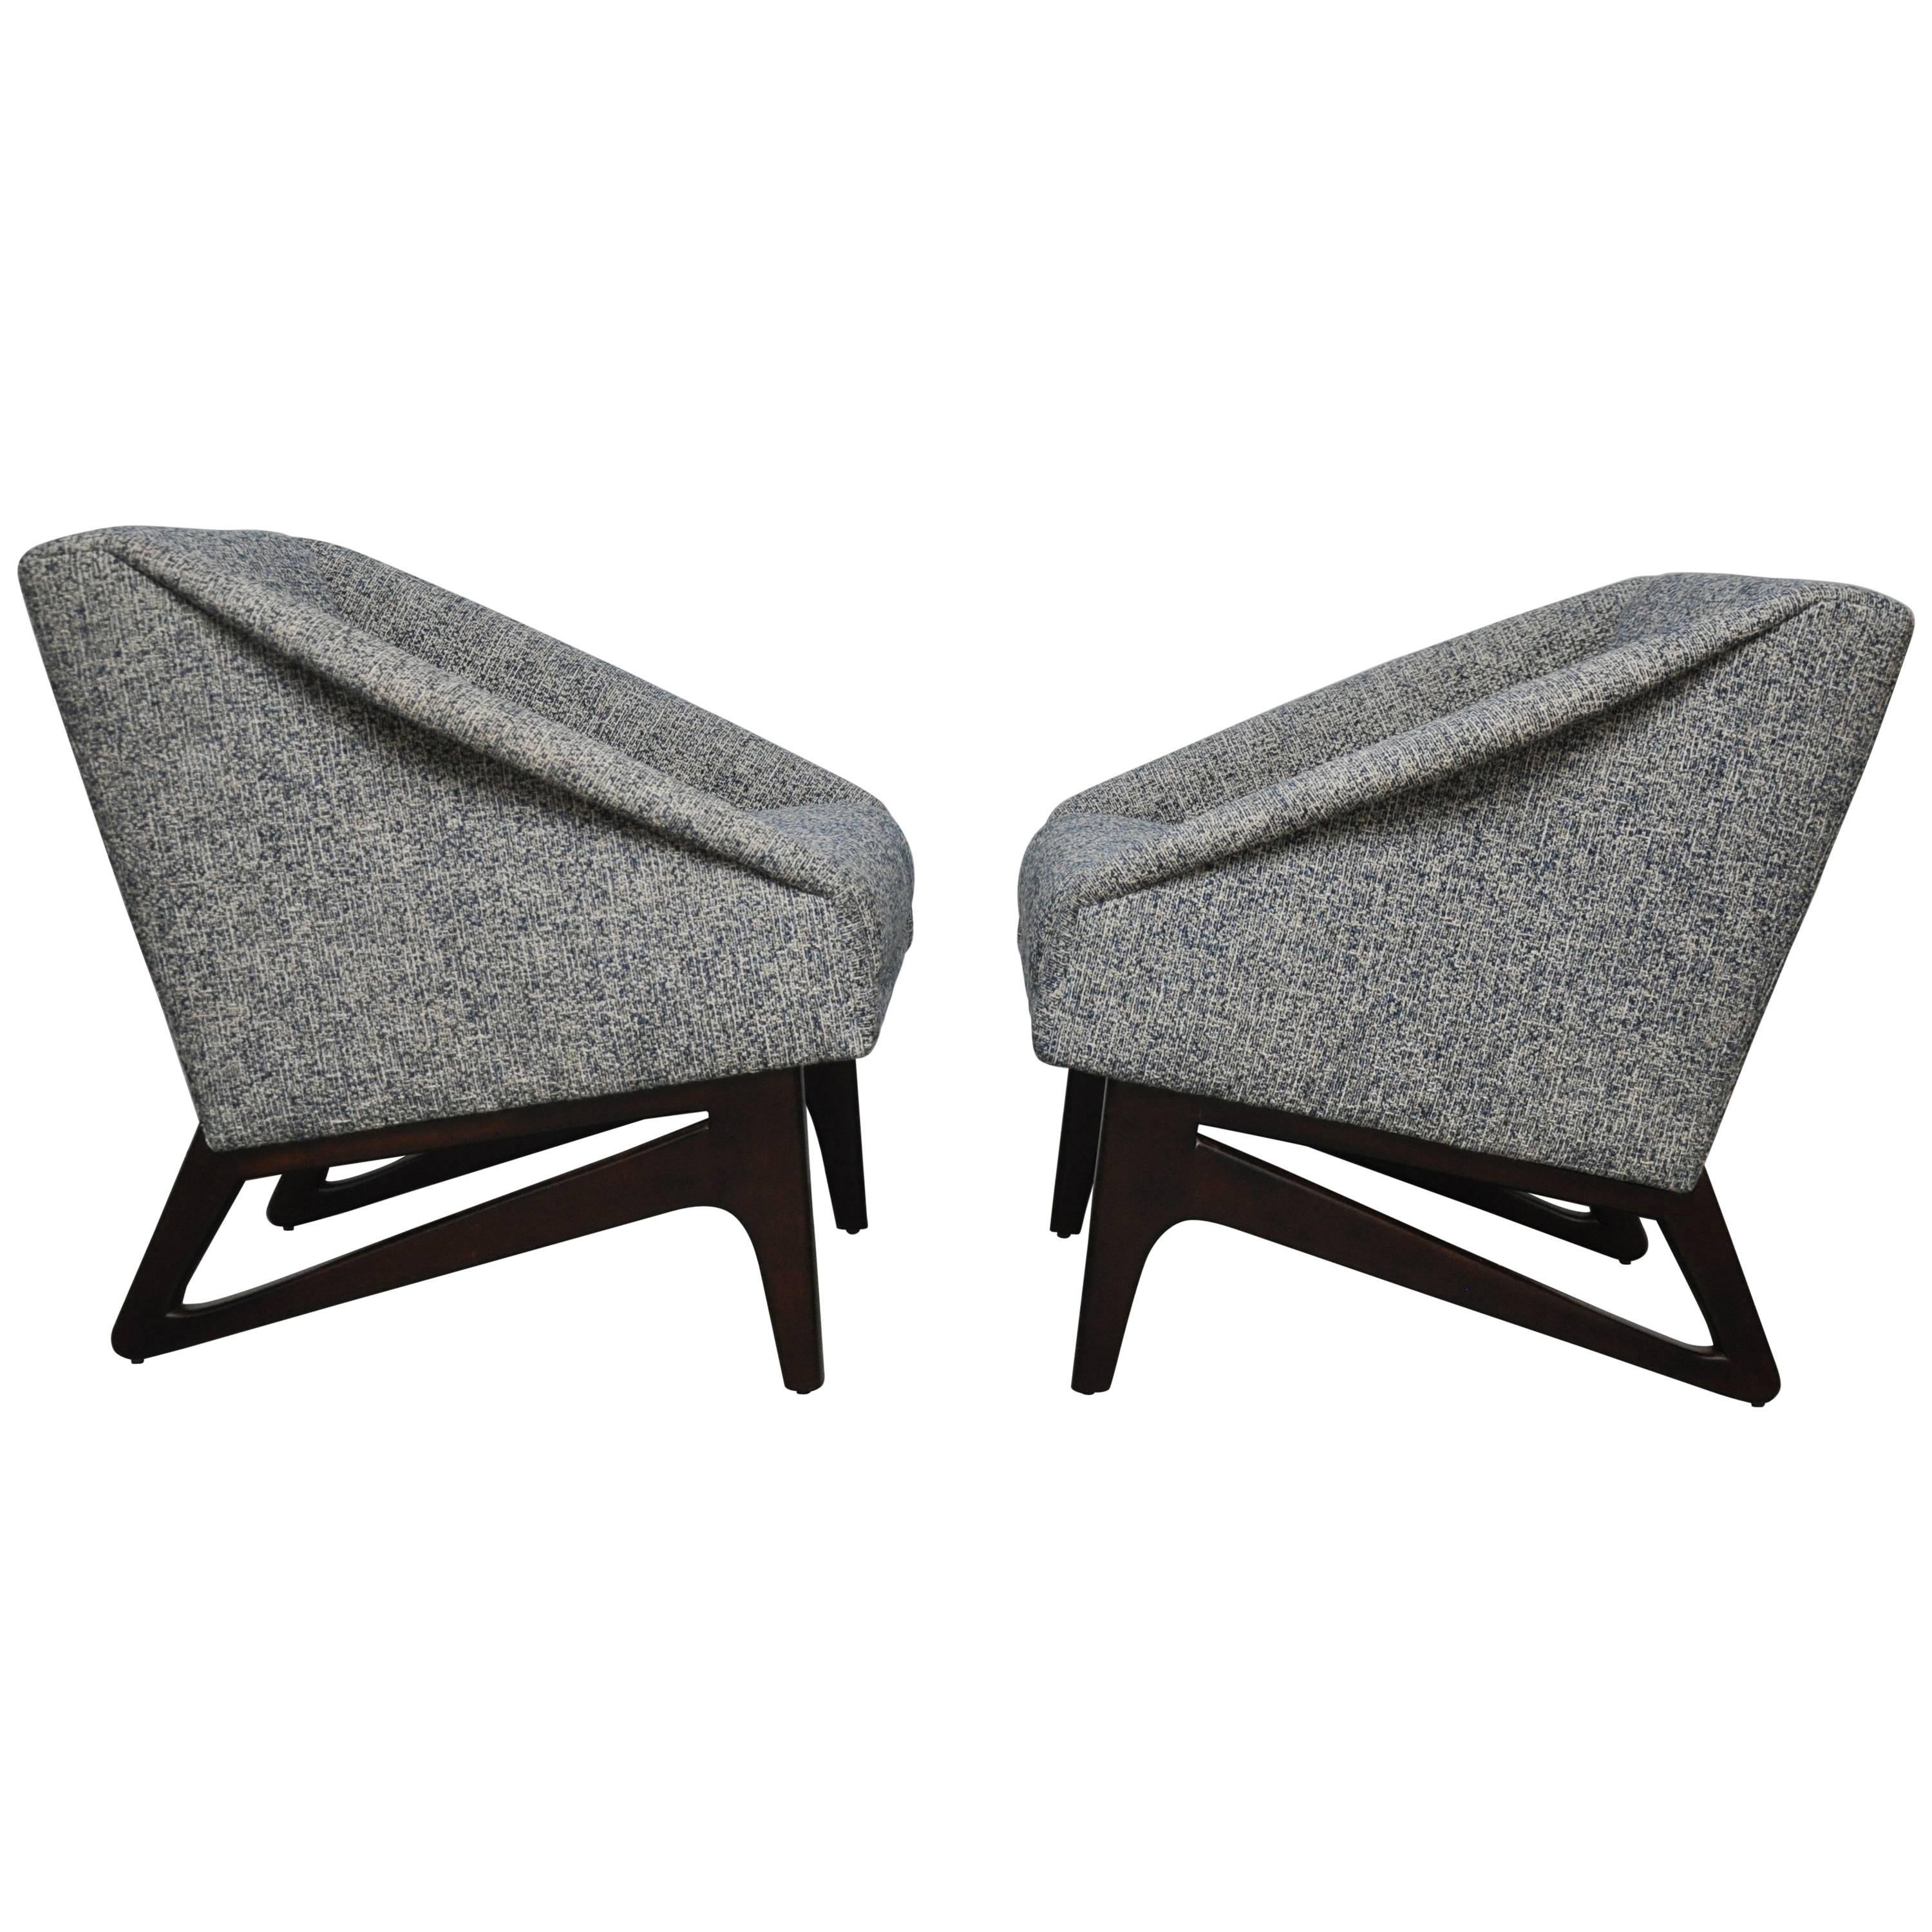 Italian Sculptural Form Lounge Chairs